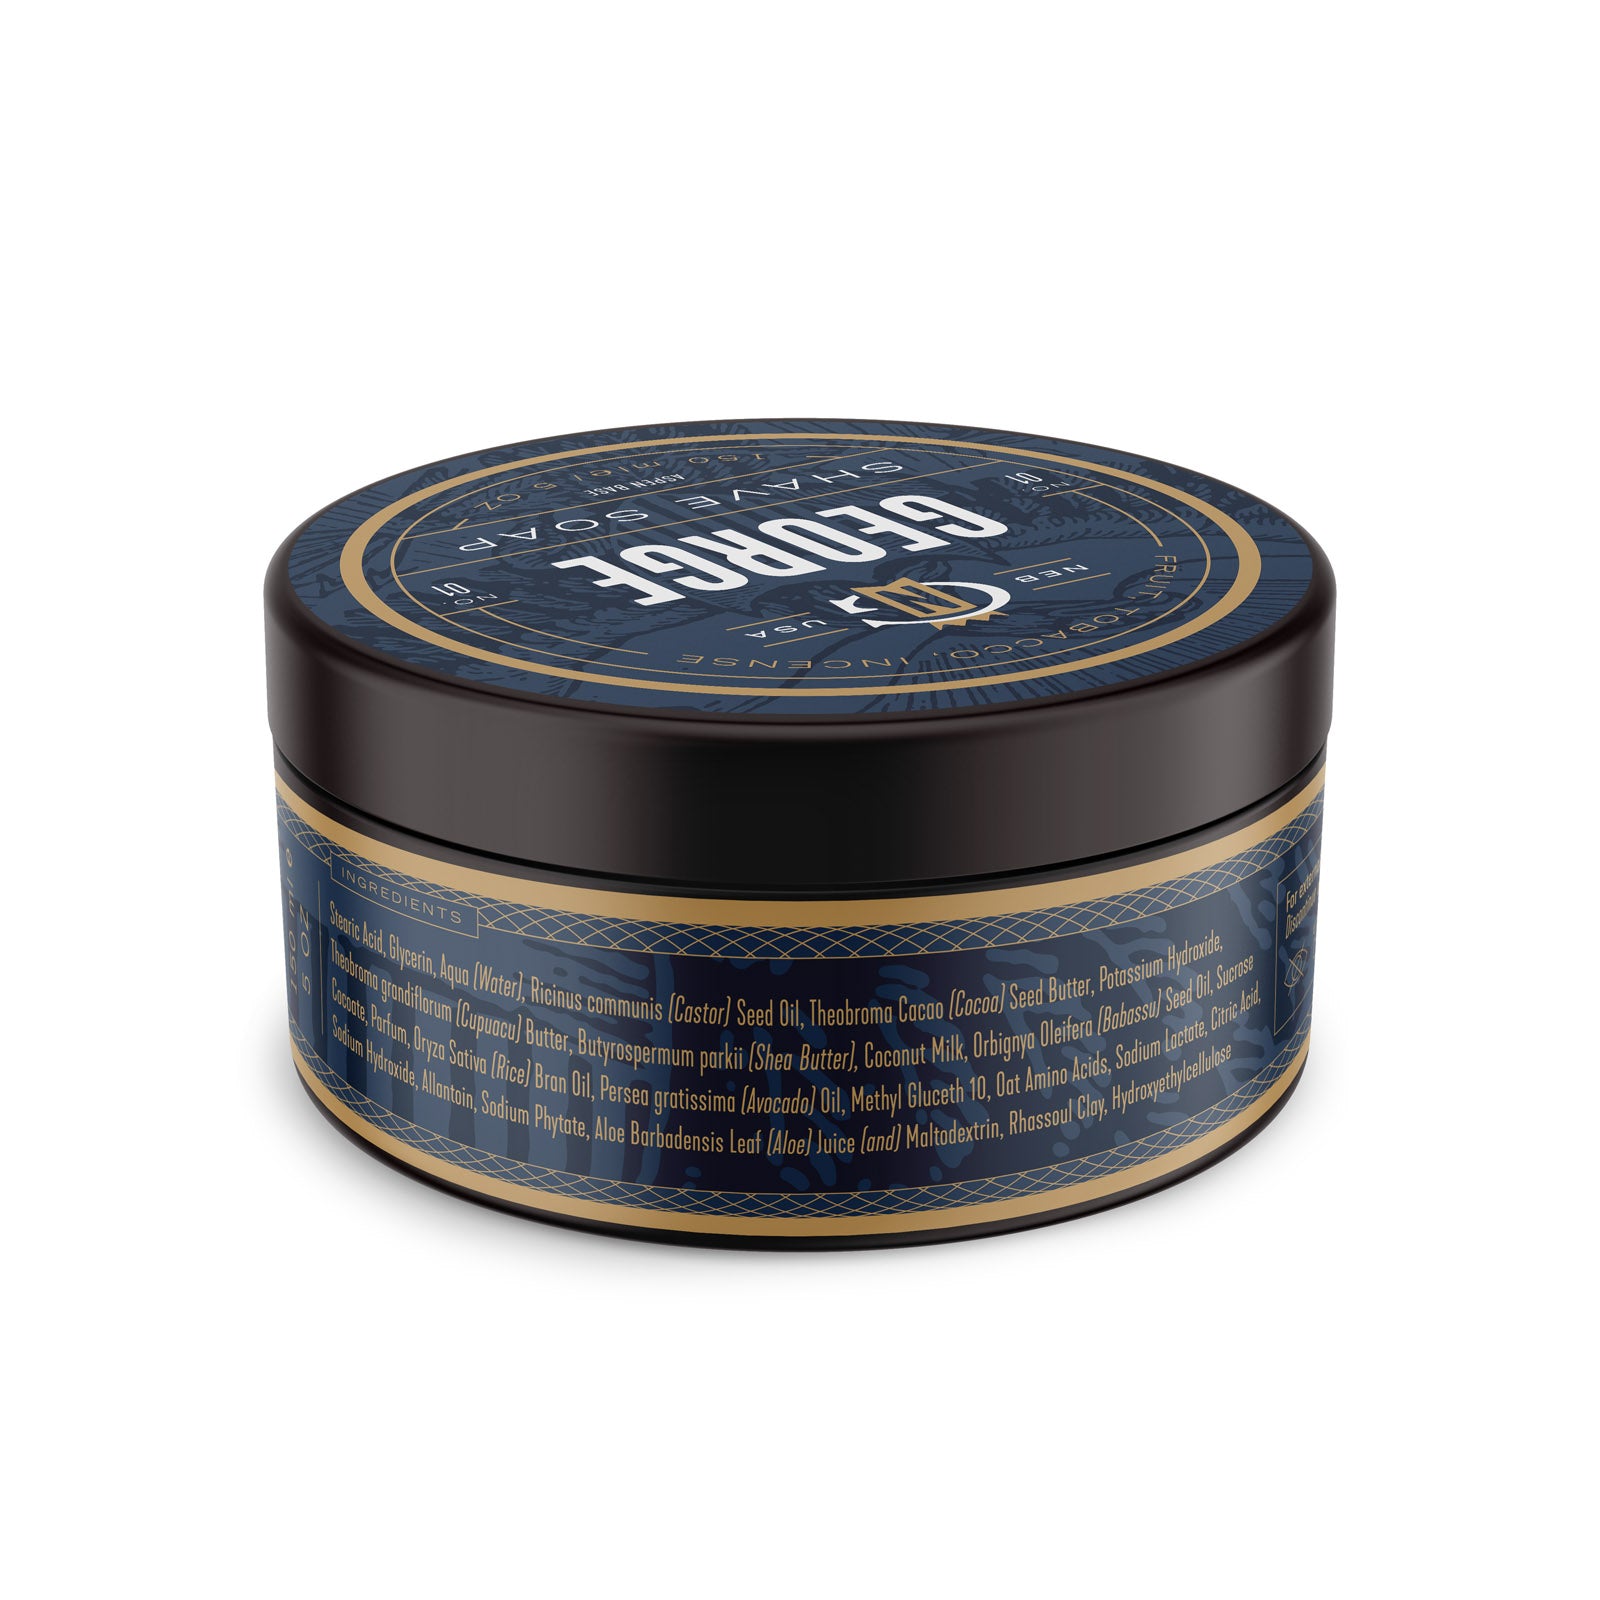 George Shave Soap